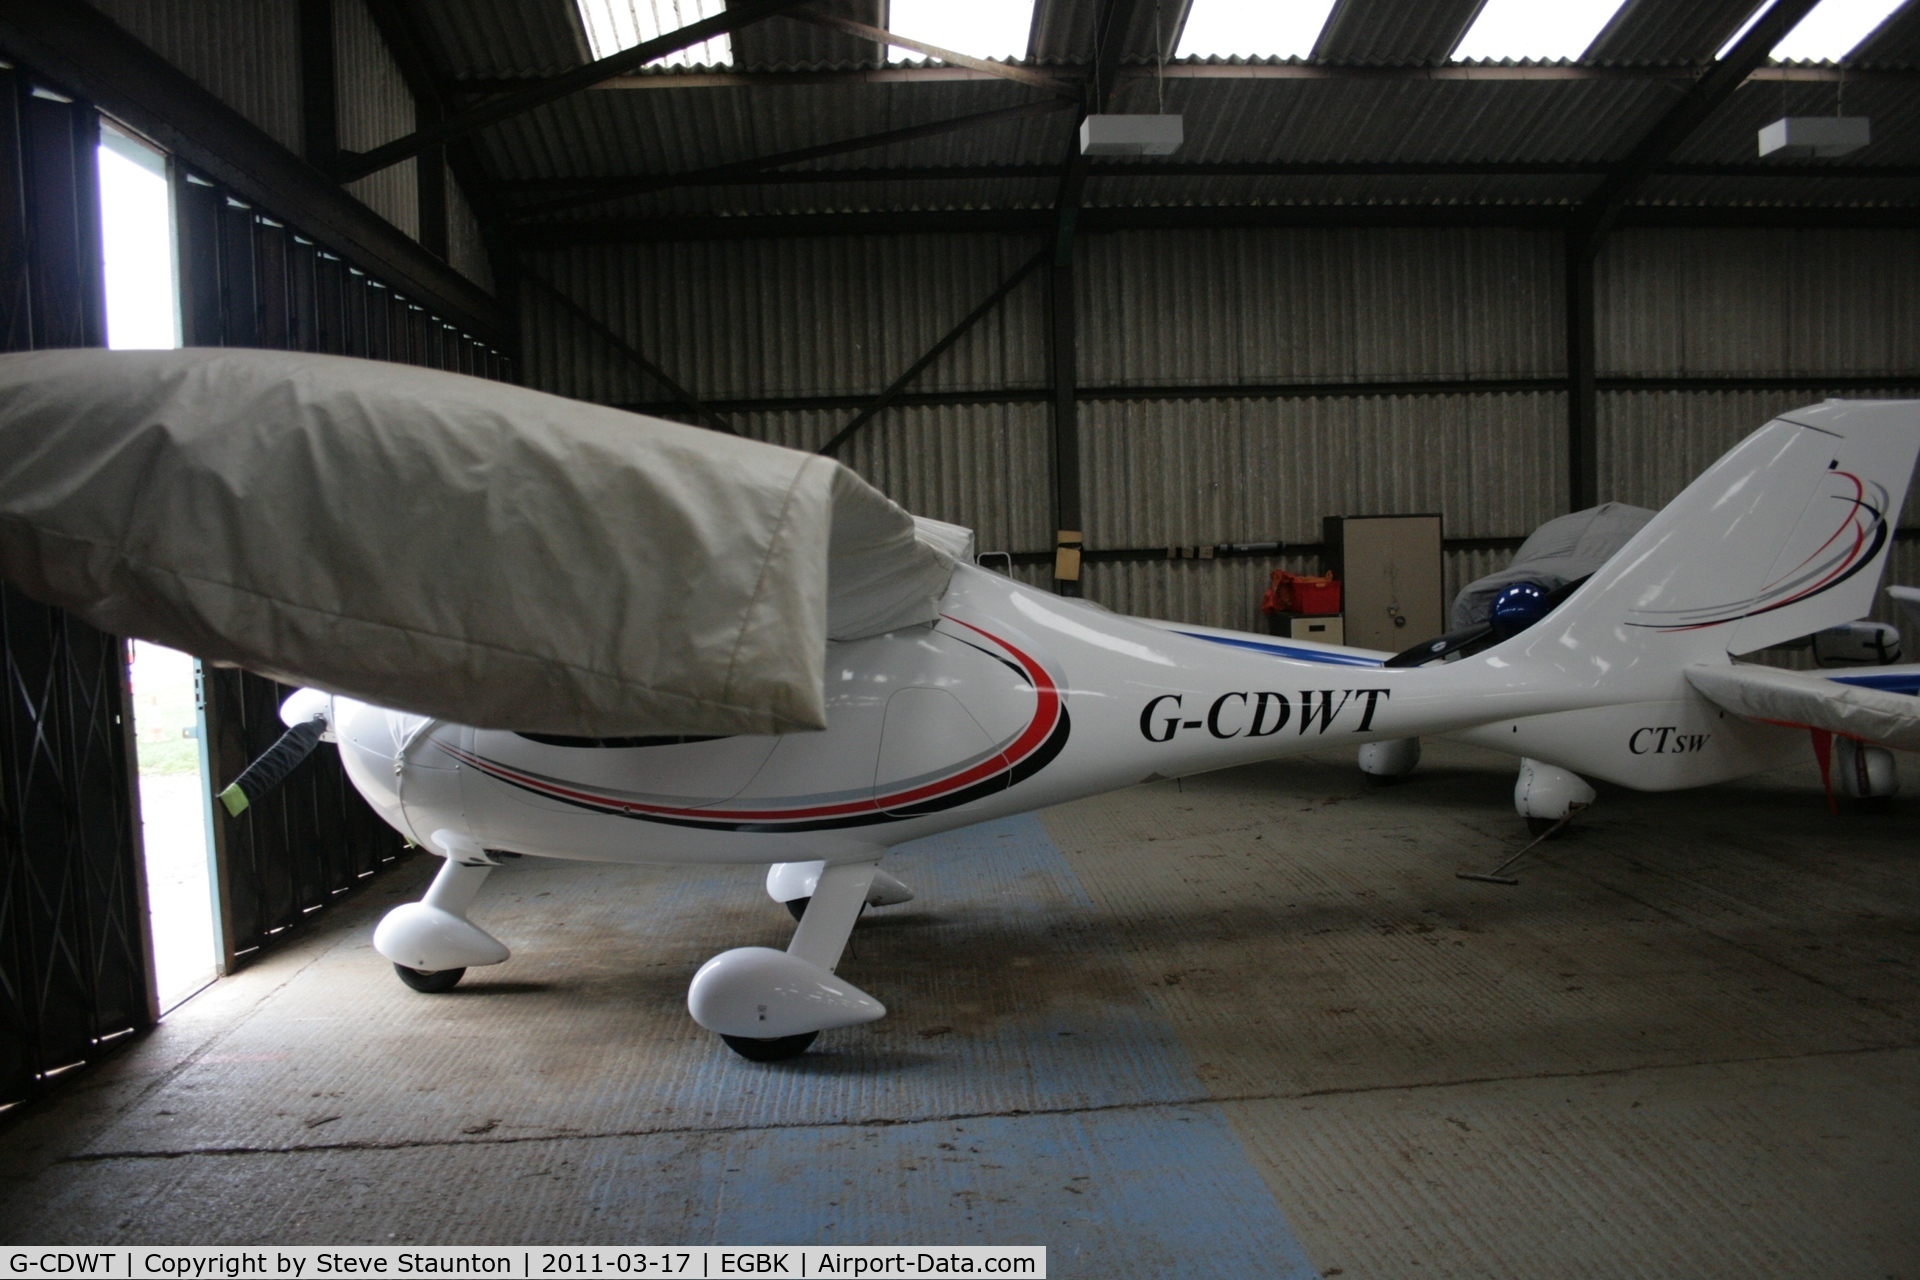 G-CDWT, 2006 Flight Design CTSW C/N 8162, Taken at Sywell Airfield March 2011